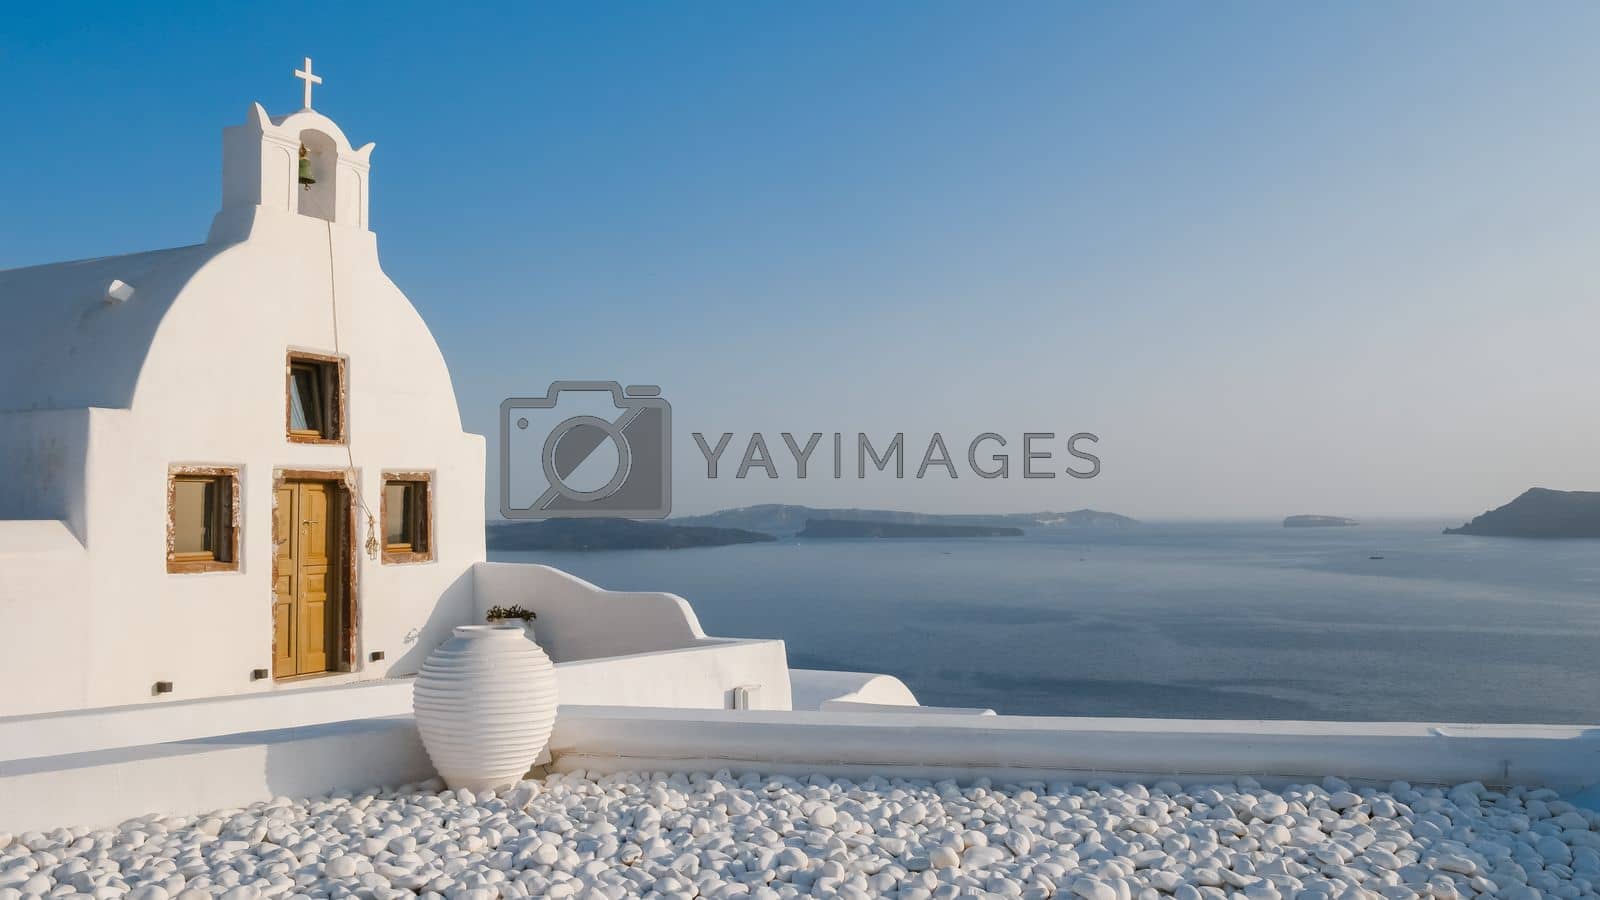 Royalty free image of Oia Santorini Greece on a sunny day during summer with whitewashed homes and churches, Greek Island by fokkebok